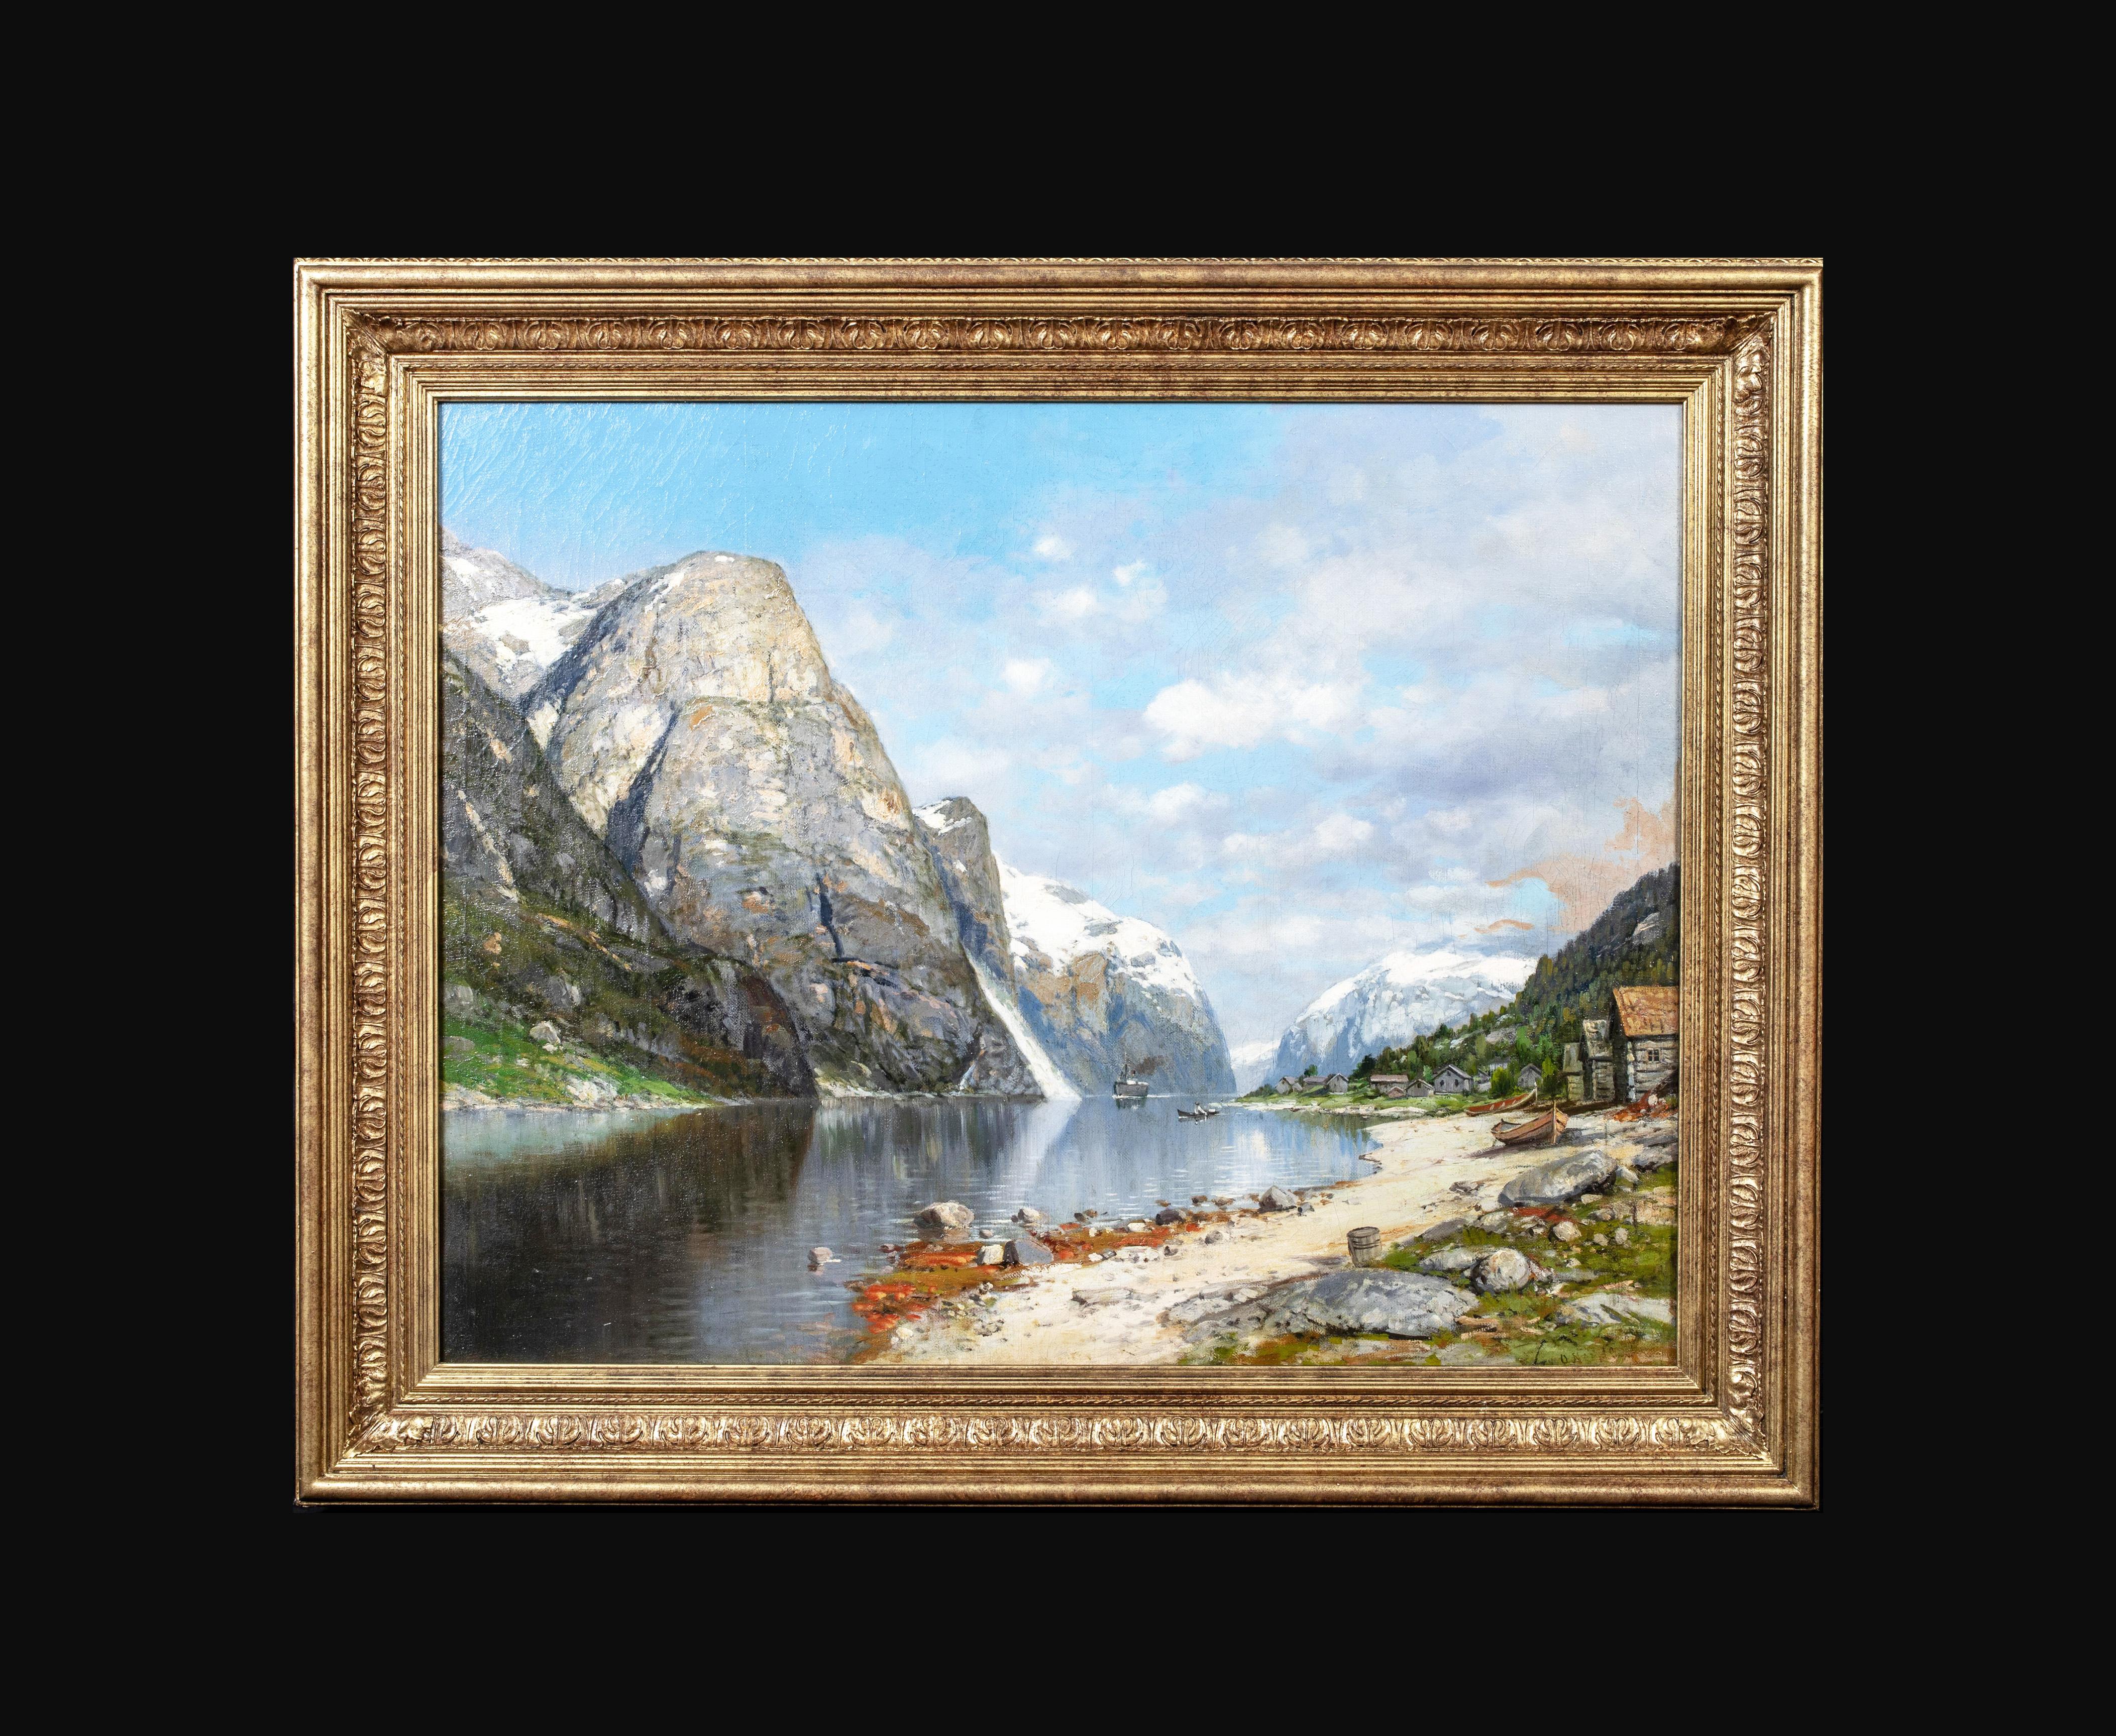 Norwegian Fjord Landscape, 19th century   European School - signed indistinctly  - Painting by Unknown